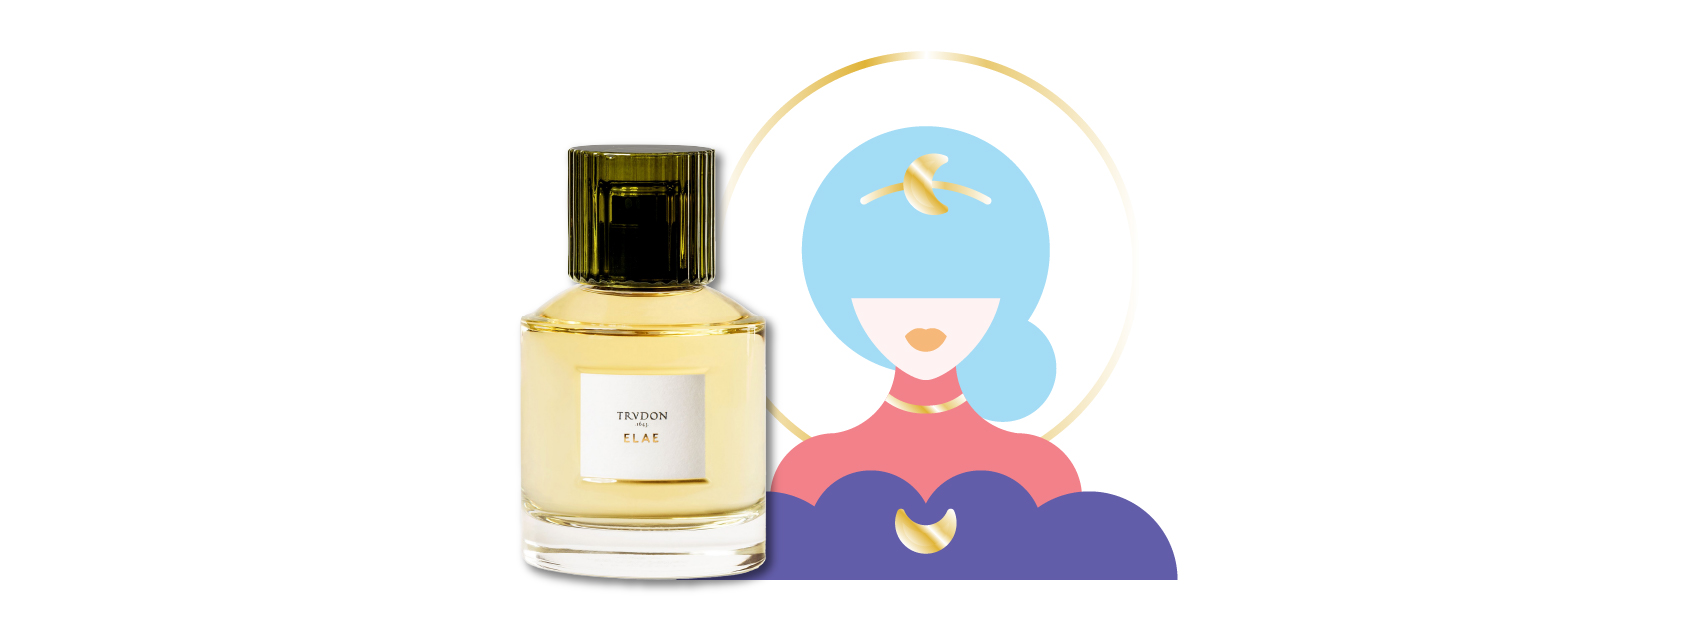 bottle of elae perfume by trudon with an illustration of diana the goddess